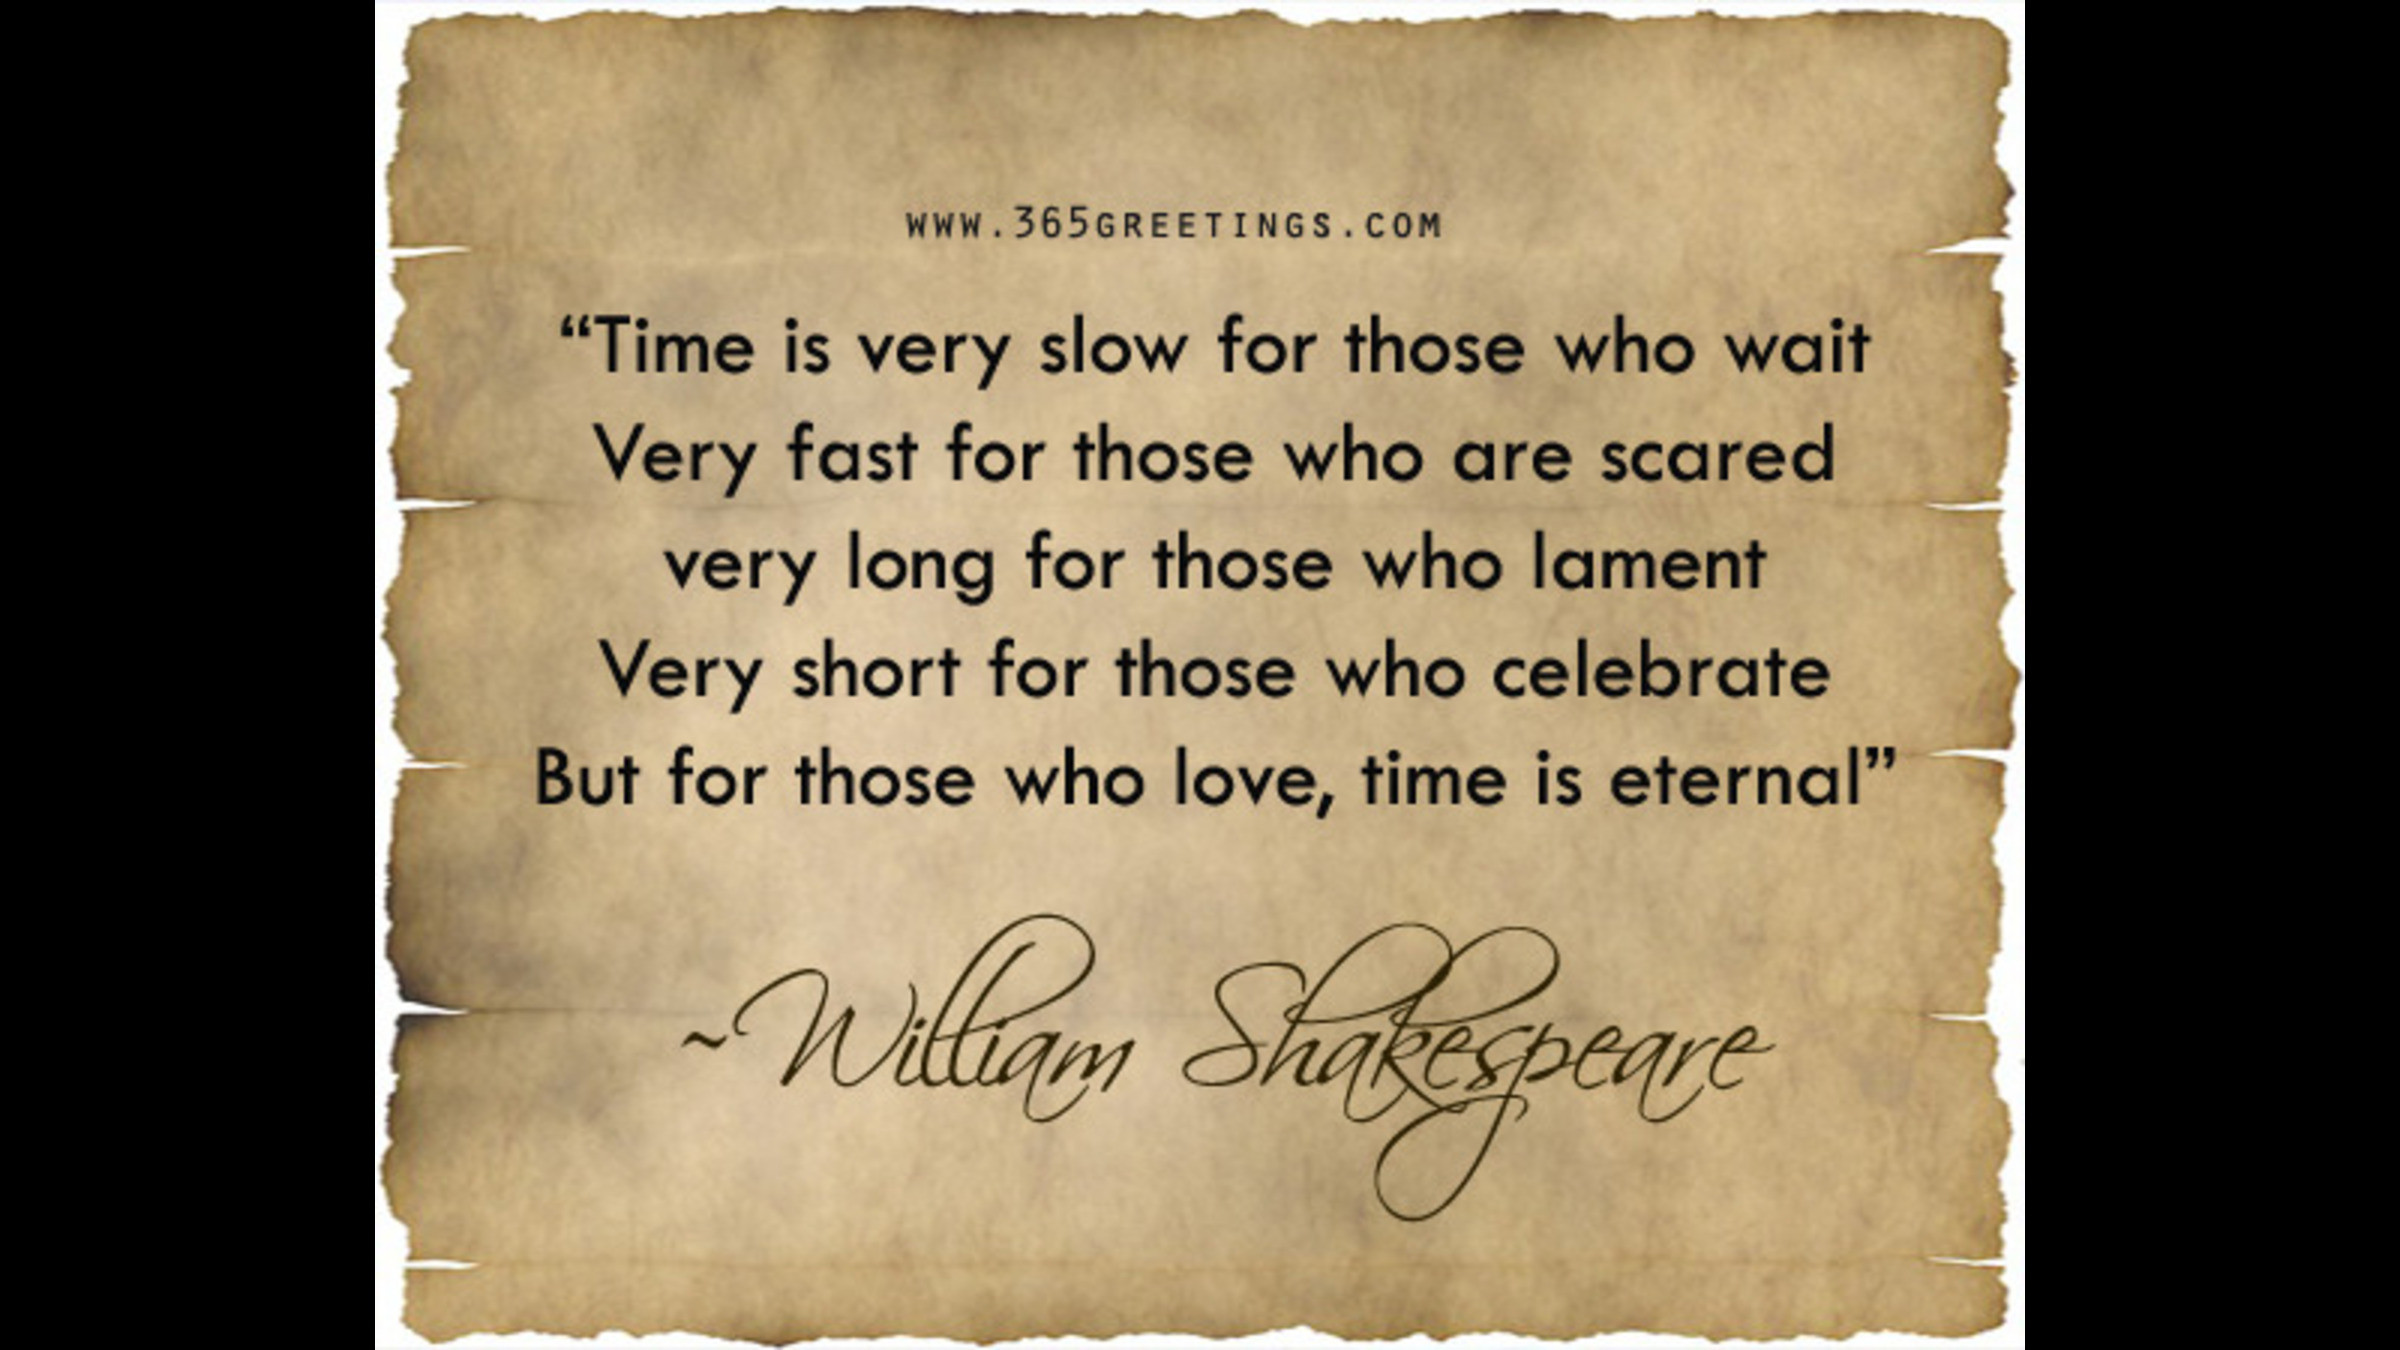 Inspirational Shakespeare Quotes
 Top 10 Shakespeare Quotes QuotesGram